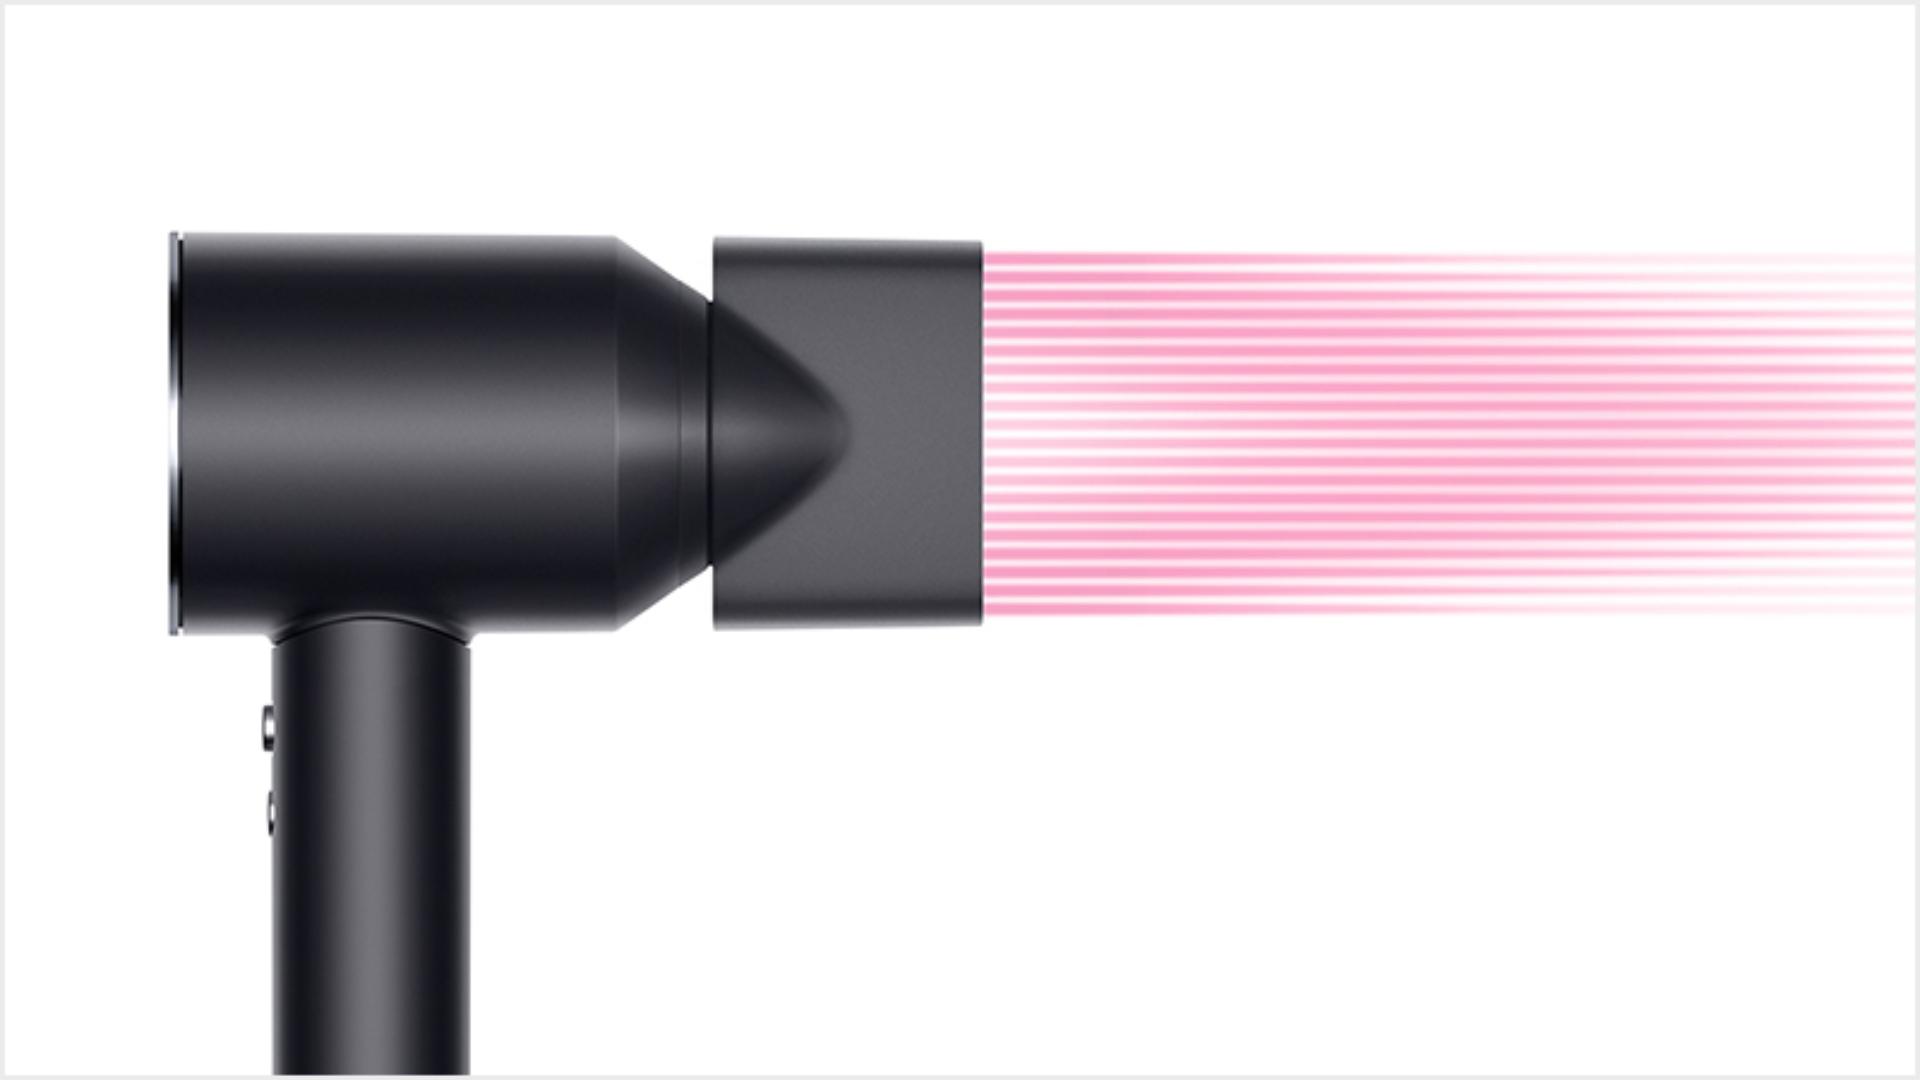 Side view of the Dyson Supersonic with Styling concentrator attachment.